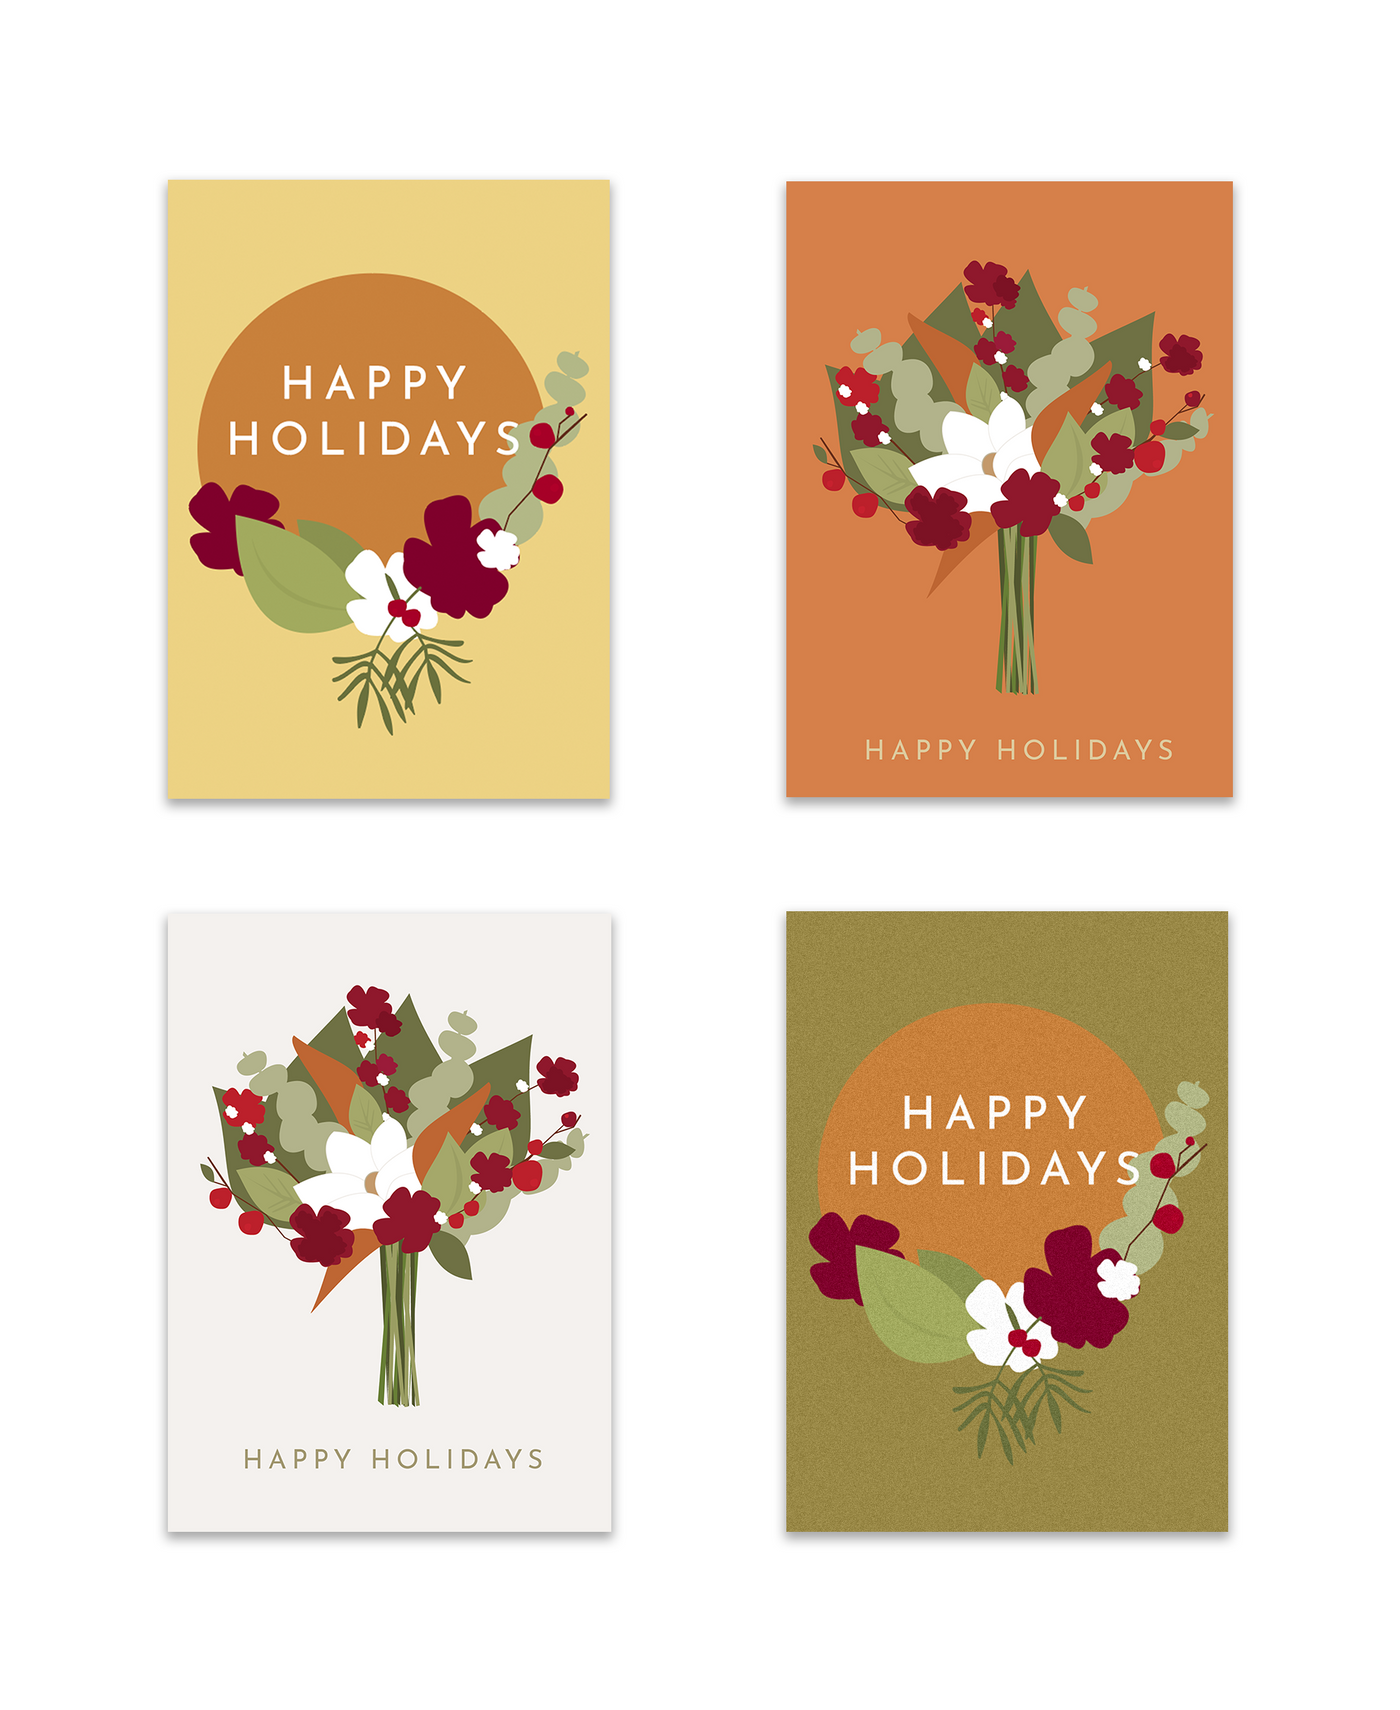 shows all four cards included in holiday floral greeting card set. One orange, one white, one pastel yellow, and one greenish brown.